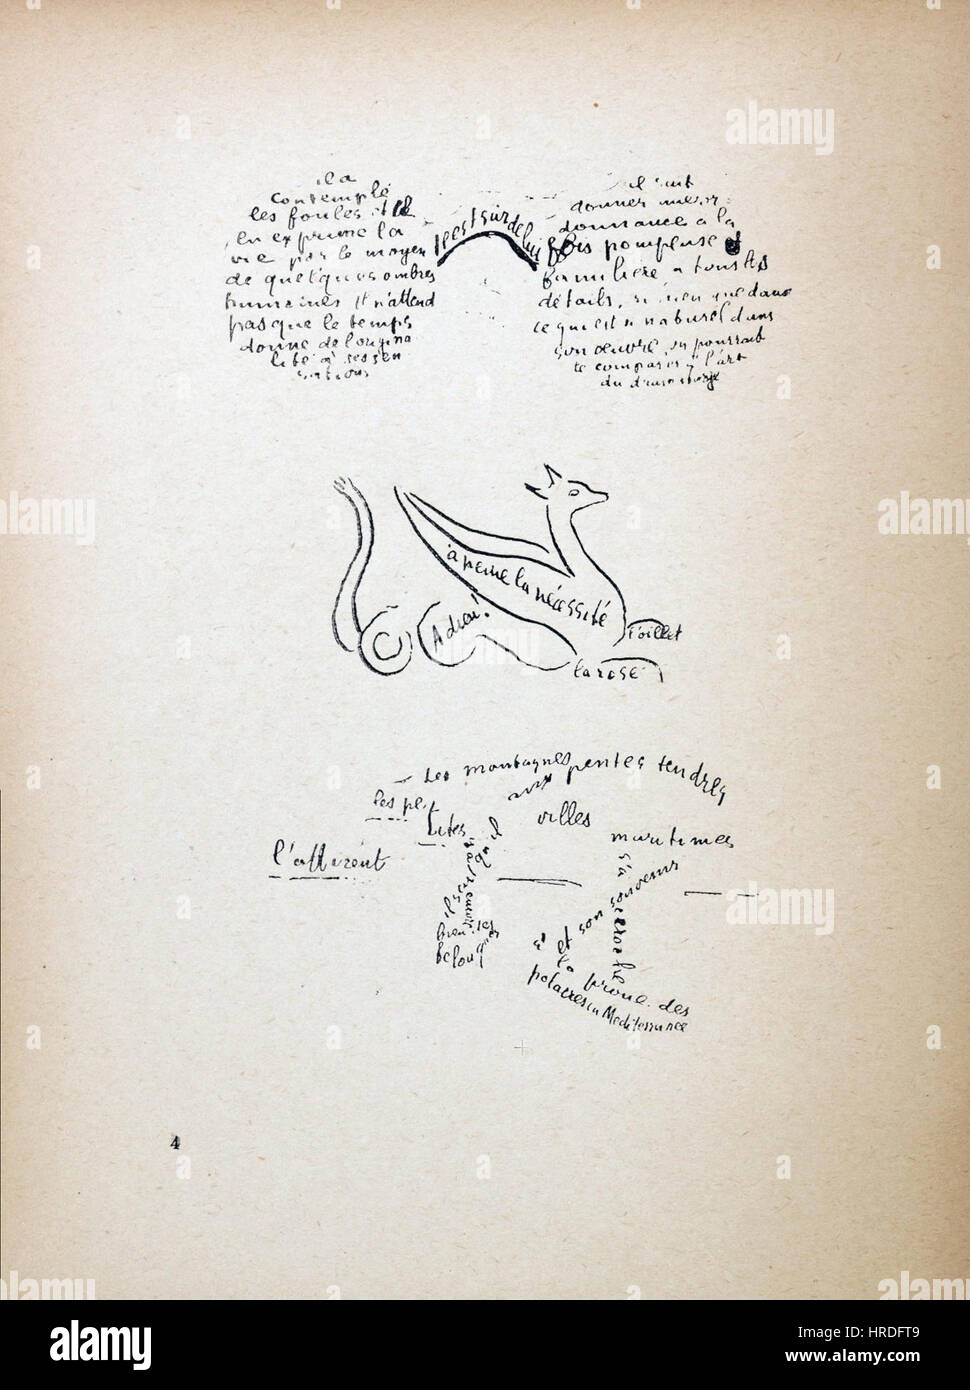 Guillaume Apollinaire, Calligramme Banque D'Images